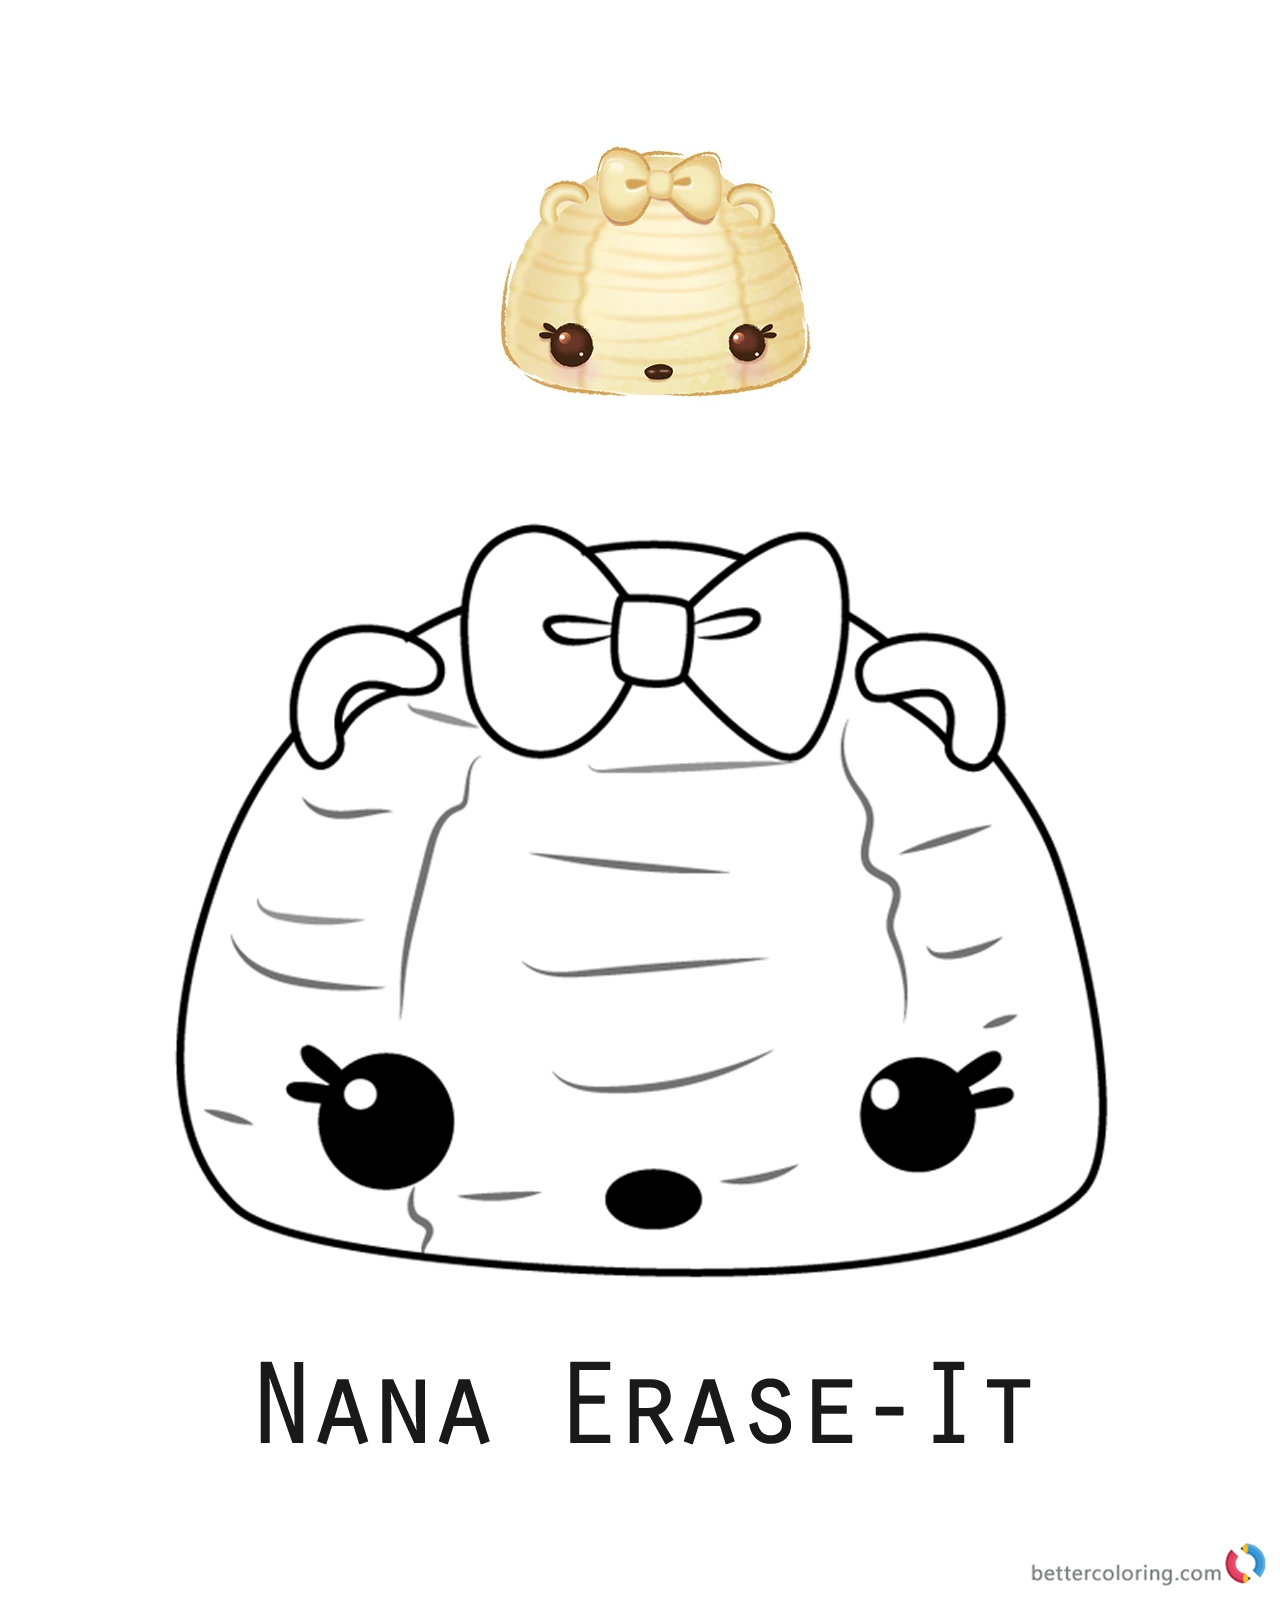 Nana Erase-It from Num Noms coloring pages printable